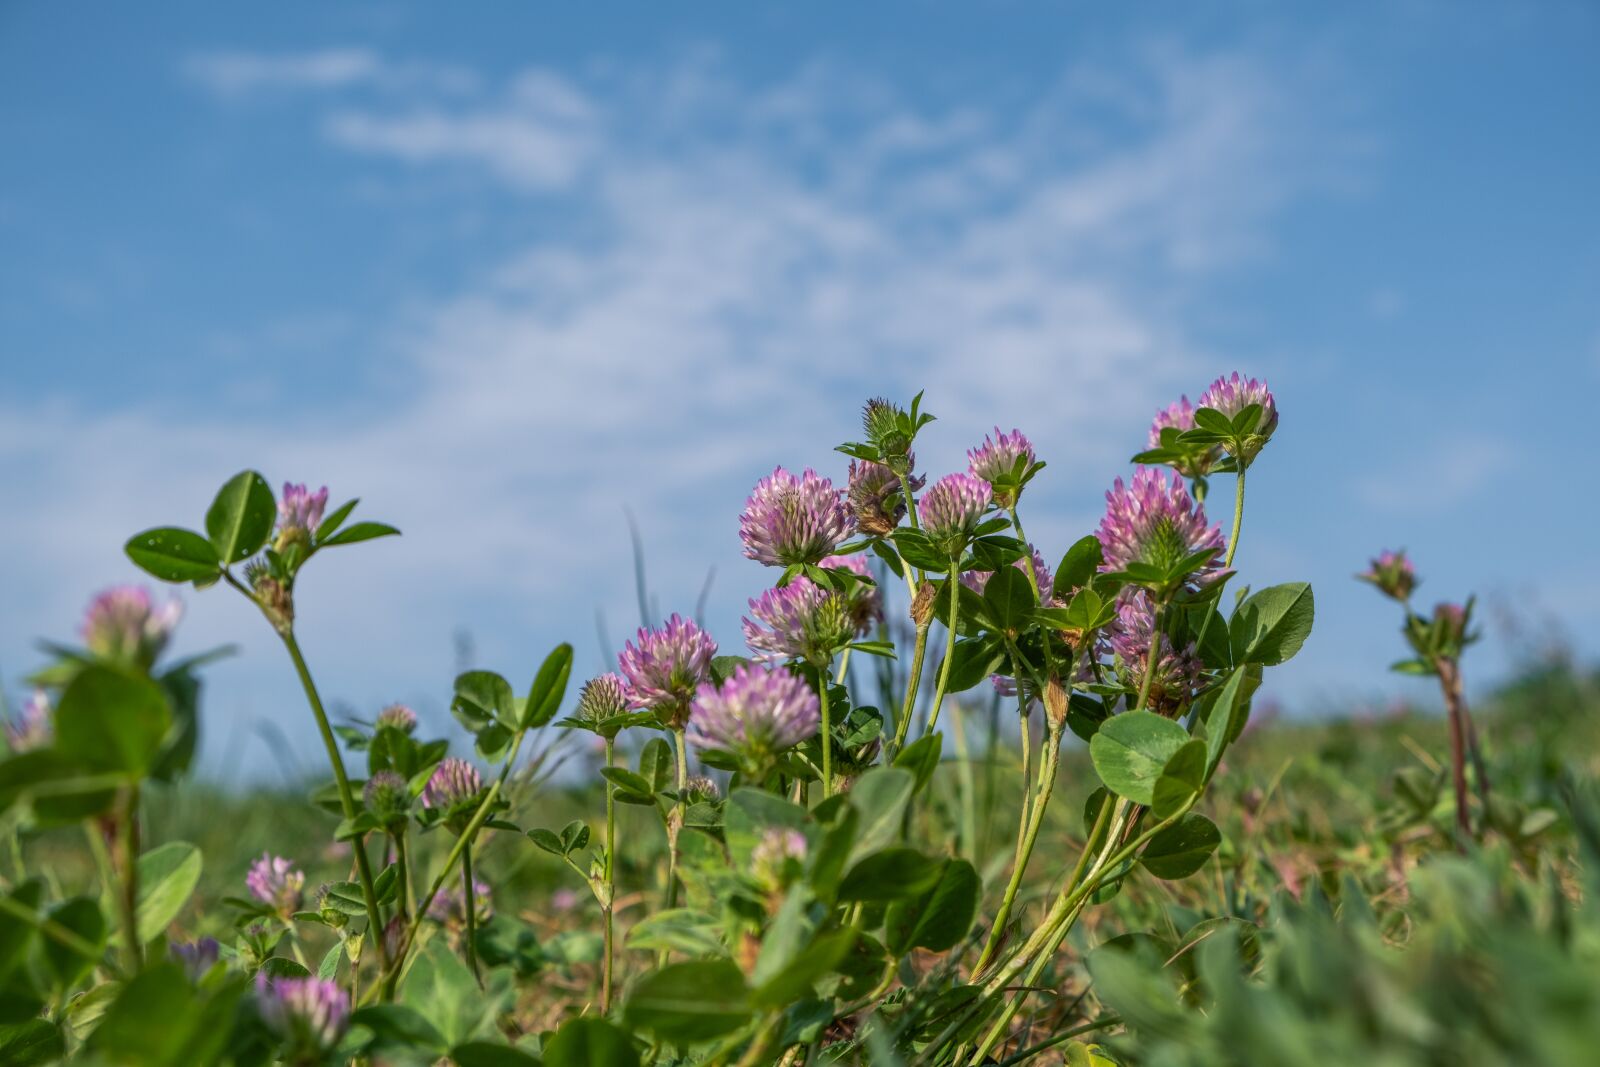 Fujifilm X-T30 + Fujifilm XF 18-55mm F2.8-4 R LM OIS sample photo. Klee, red clover, plant photography